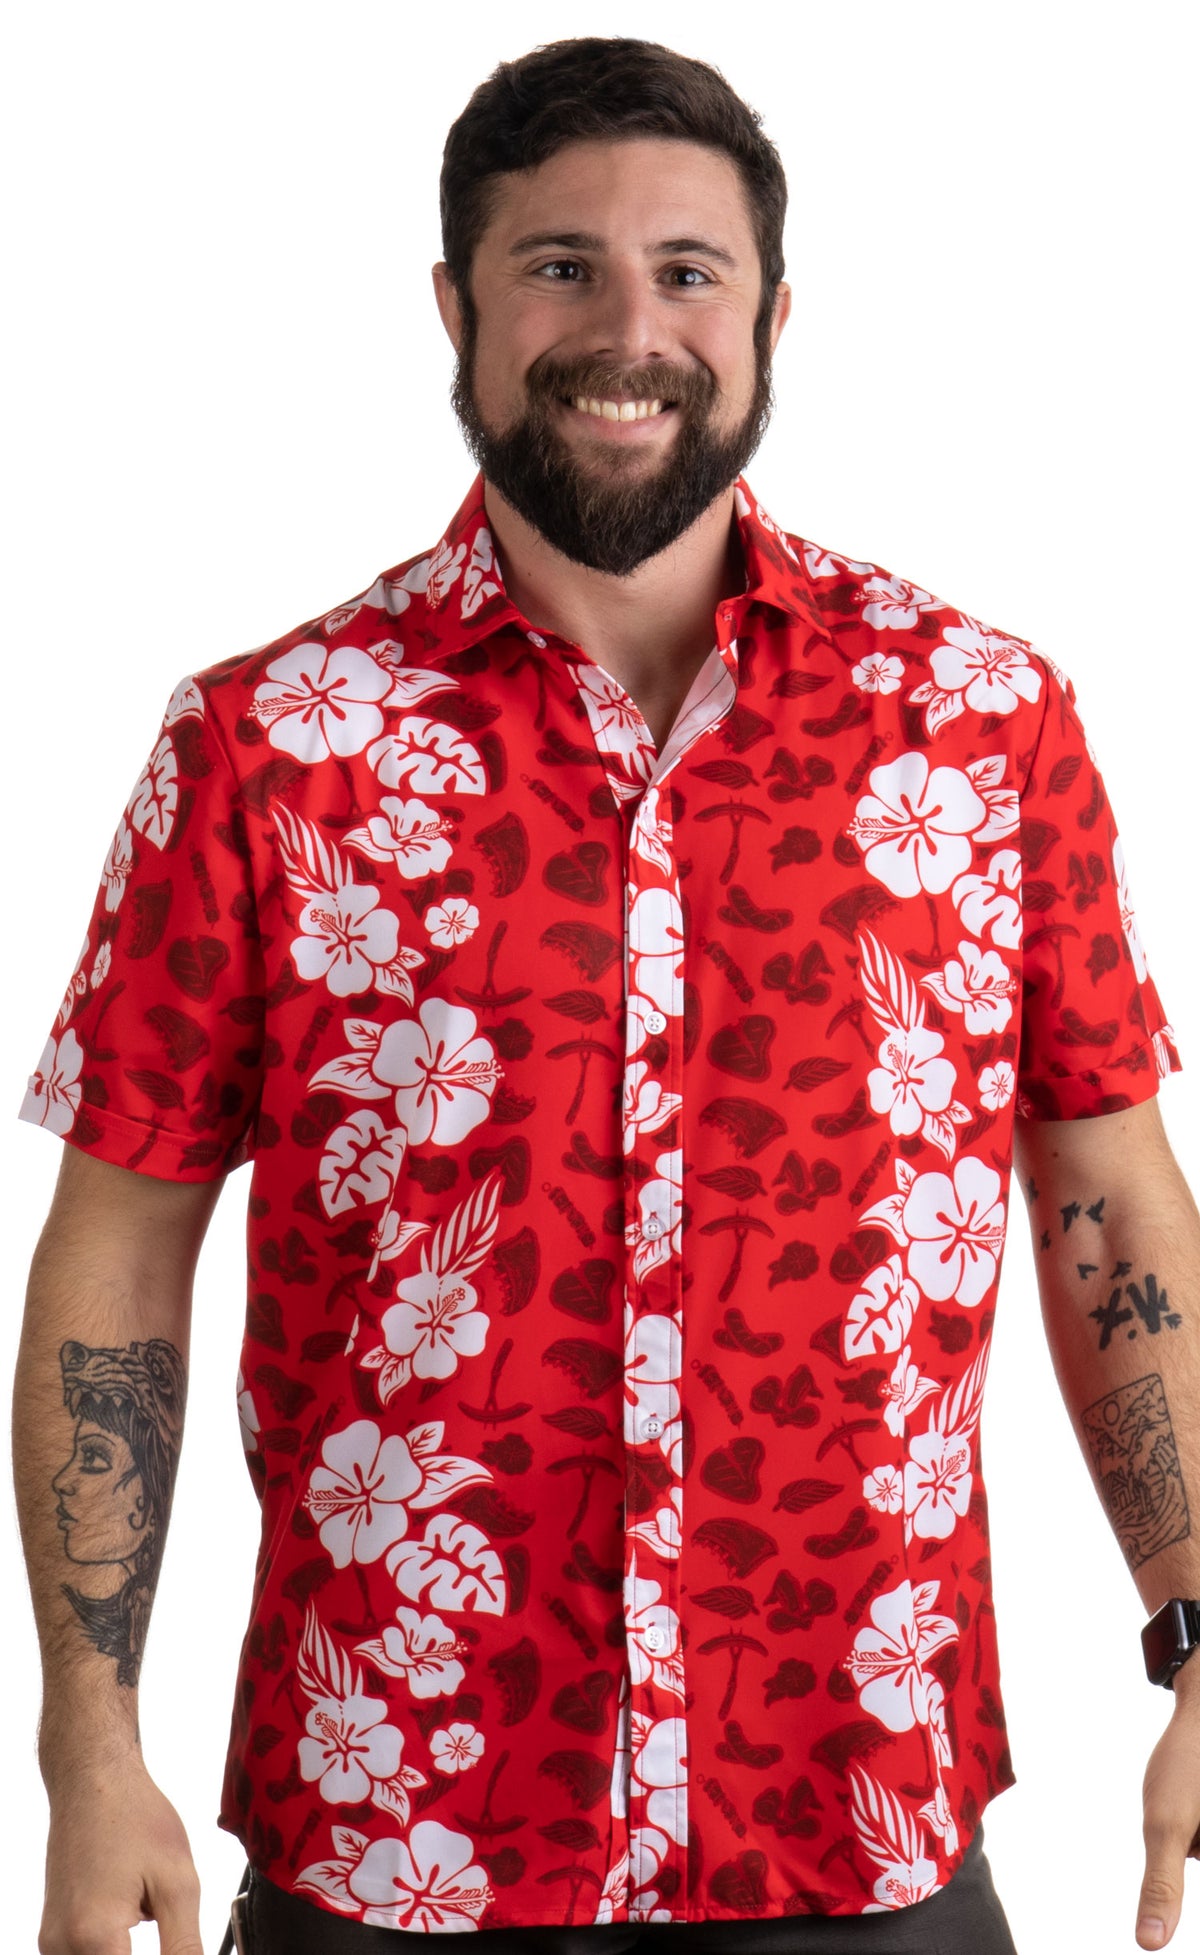 Meats in the Sun | Funny BBQ Grilling Hawaiian Button Down Polo Party Shirt Men